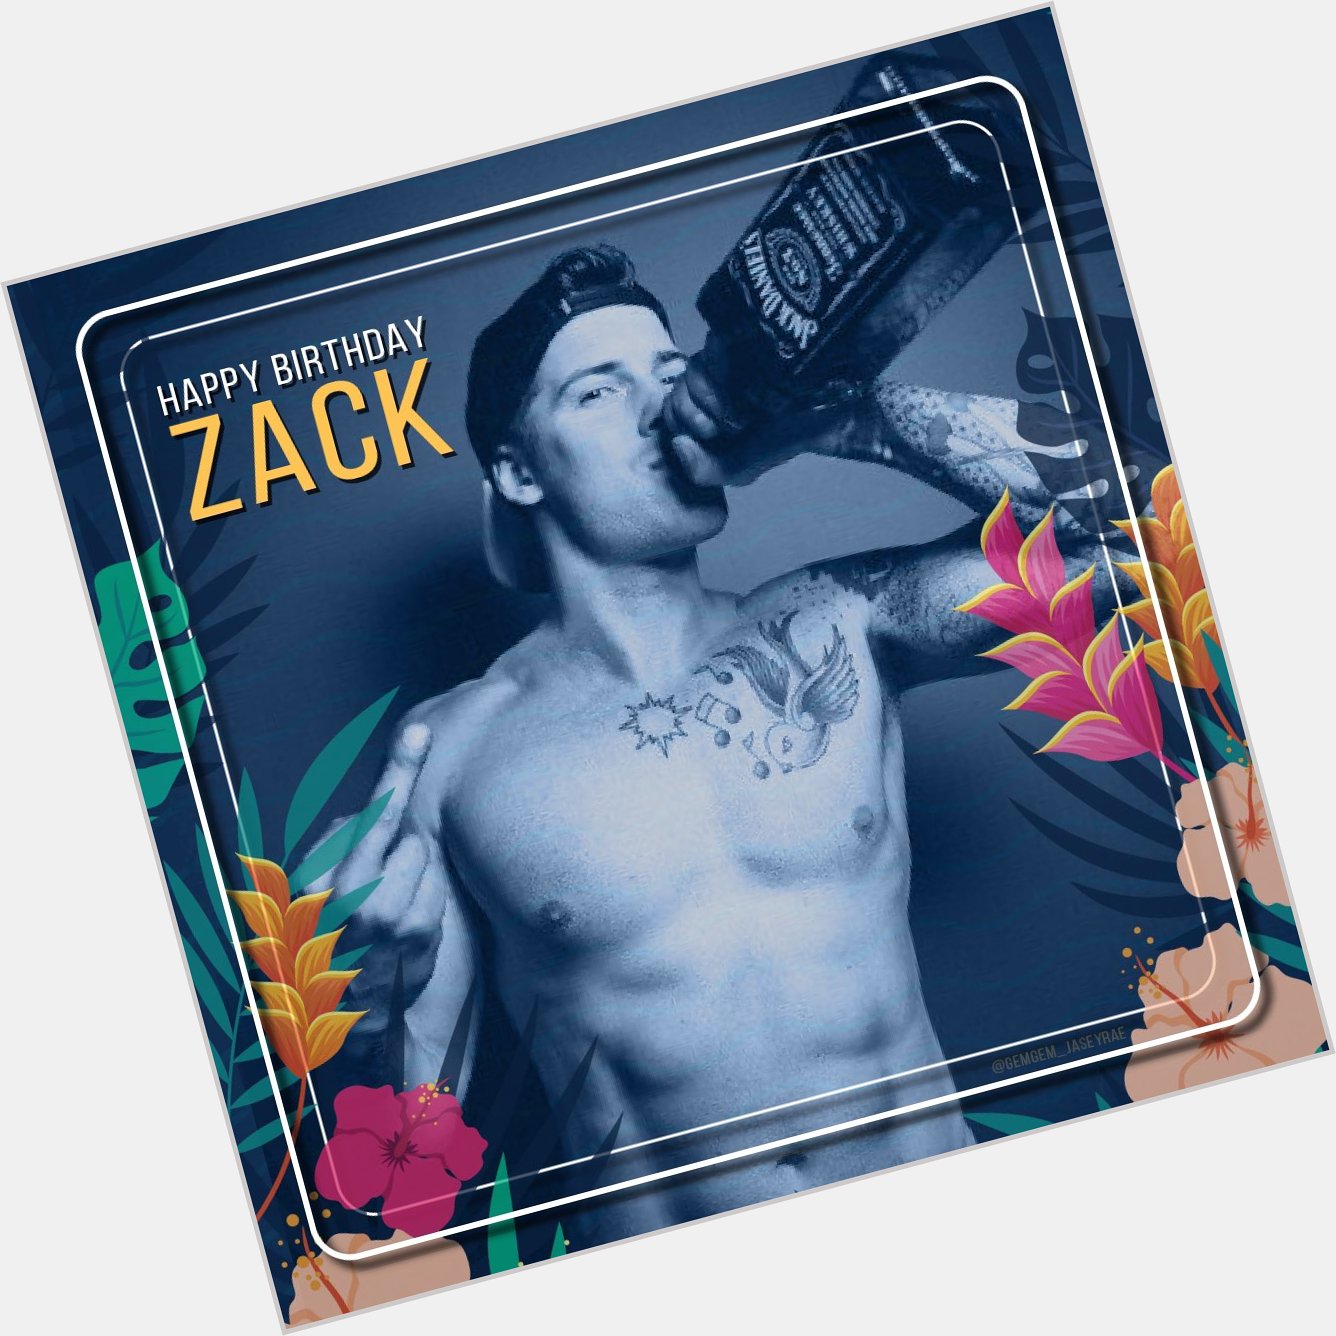 Happy Birthday to our favourite bass playing, beach cleaning, skate boarding, Hawaii livin man!
Zack Merrick!! 